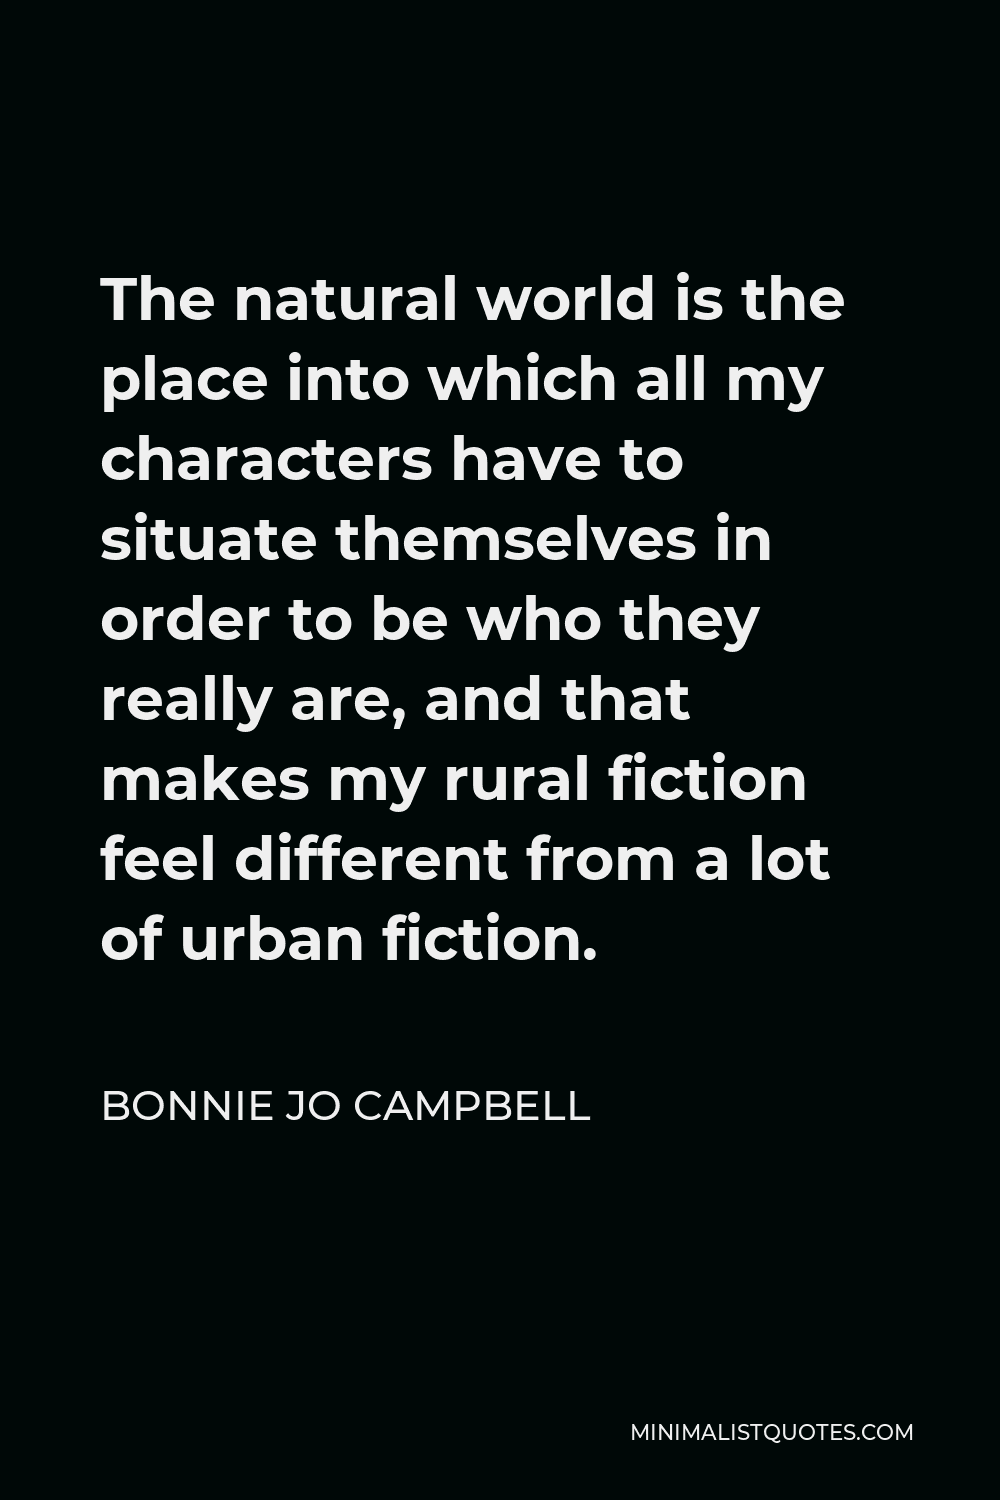 Bonnie Jo Campbell Quote - The natural world is the place into which all my characters have to situate themselves in order to be who they really are, and that makes my rural fiction feel different from a lot of urban fiction.